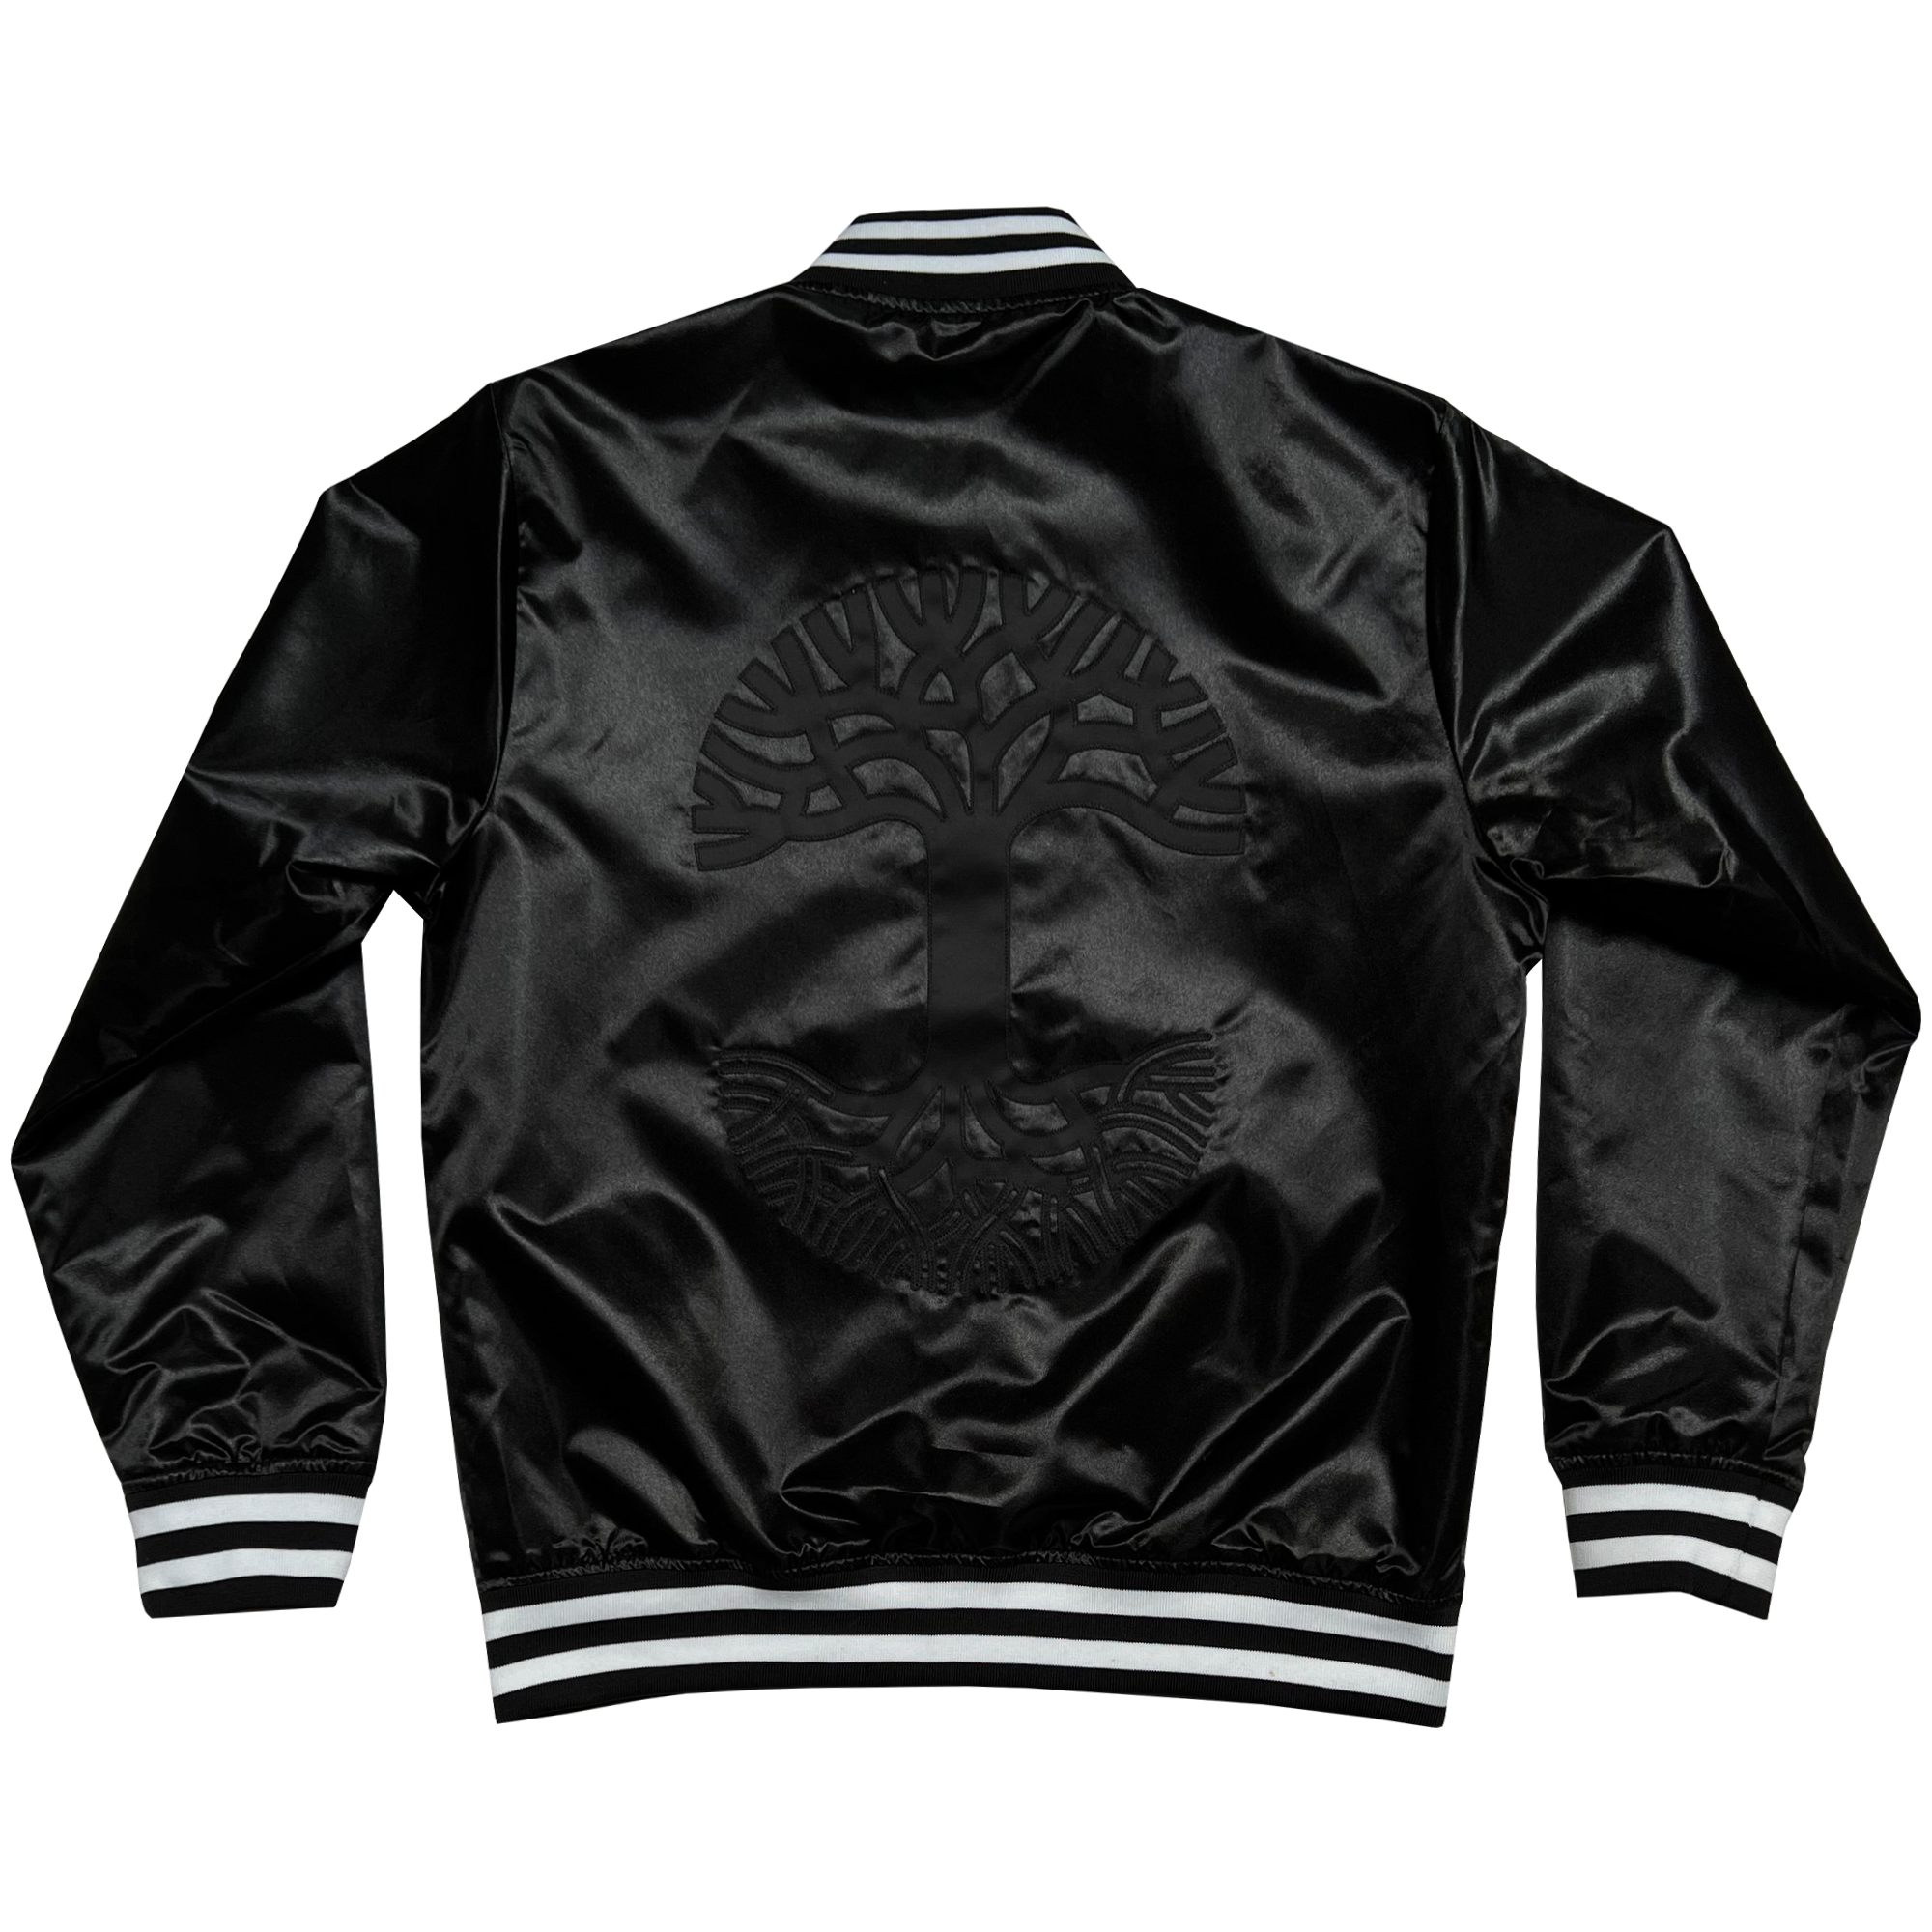  The backside of Mitchell & Ness black satin reversible jacket with a large centered Oaklandish tree logo with black and white ribbing at the collar, cuff, and waistband.